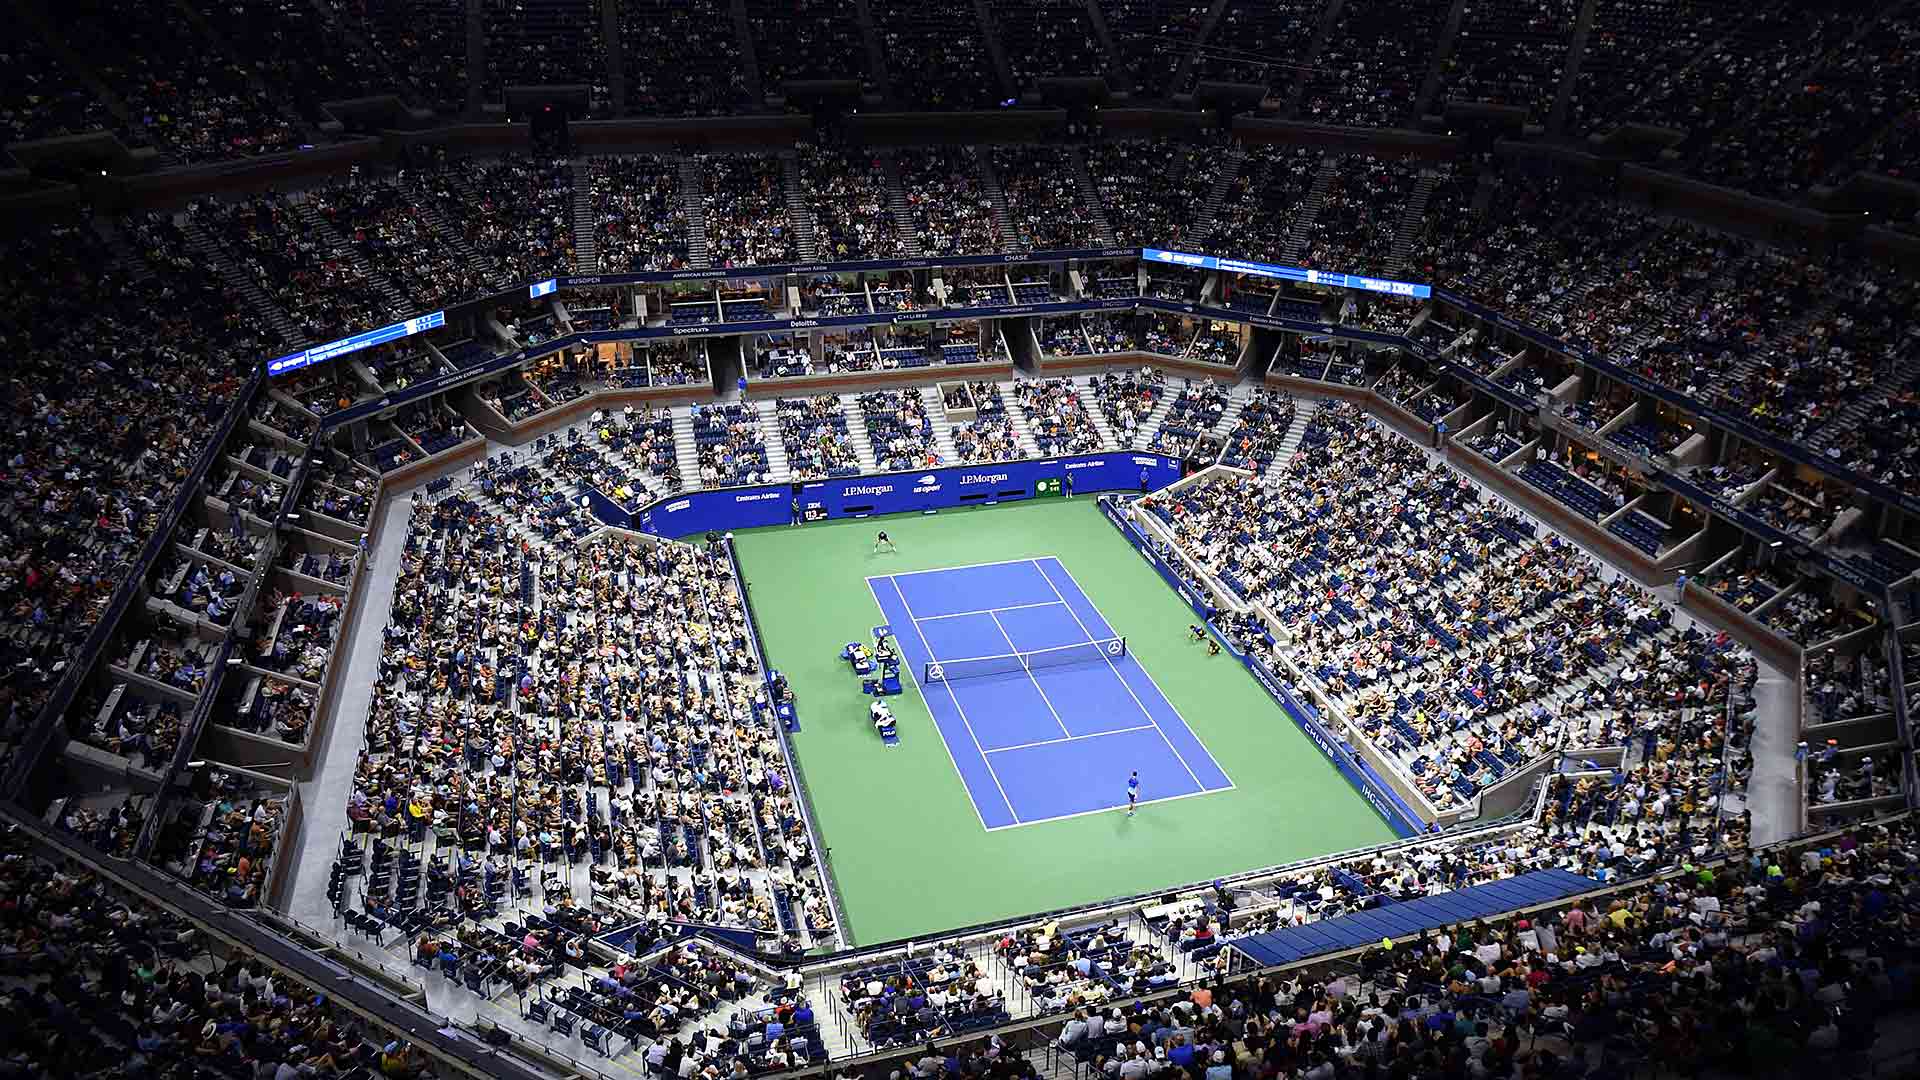 US OPEN 2022 LIVE: Sony Pictures Networks India acquires exclusive Television & Digital rights for US Open; becomes premier destination for tennis in India  